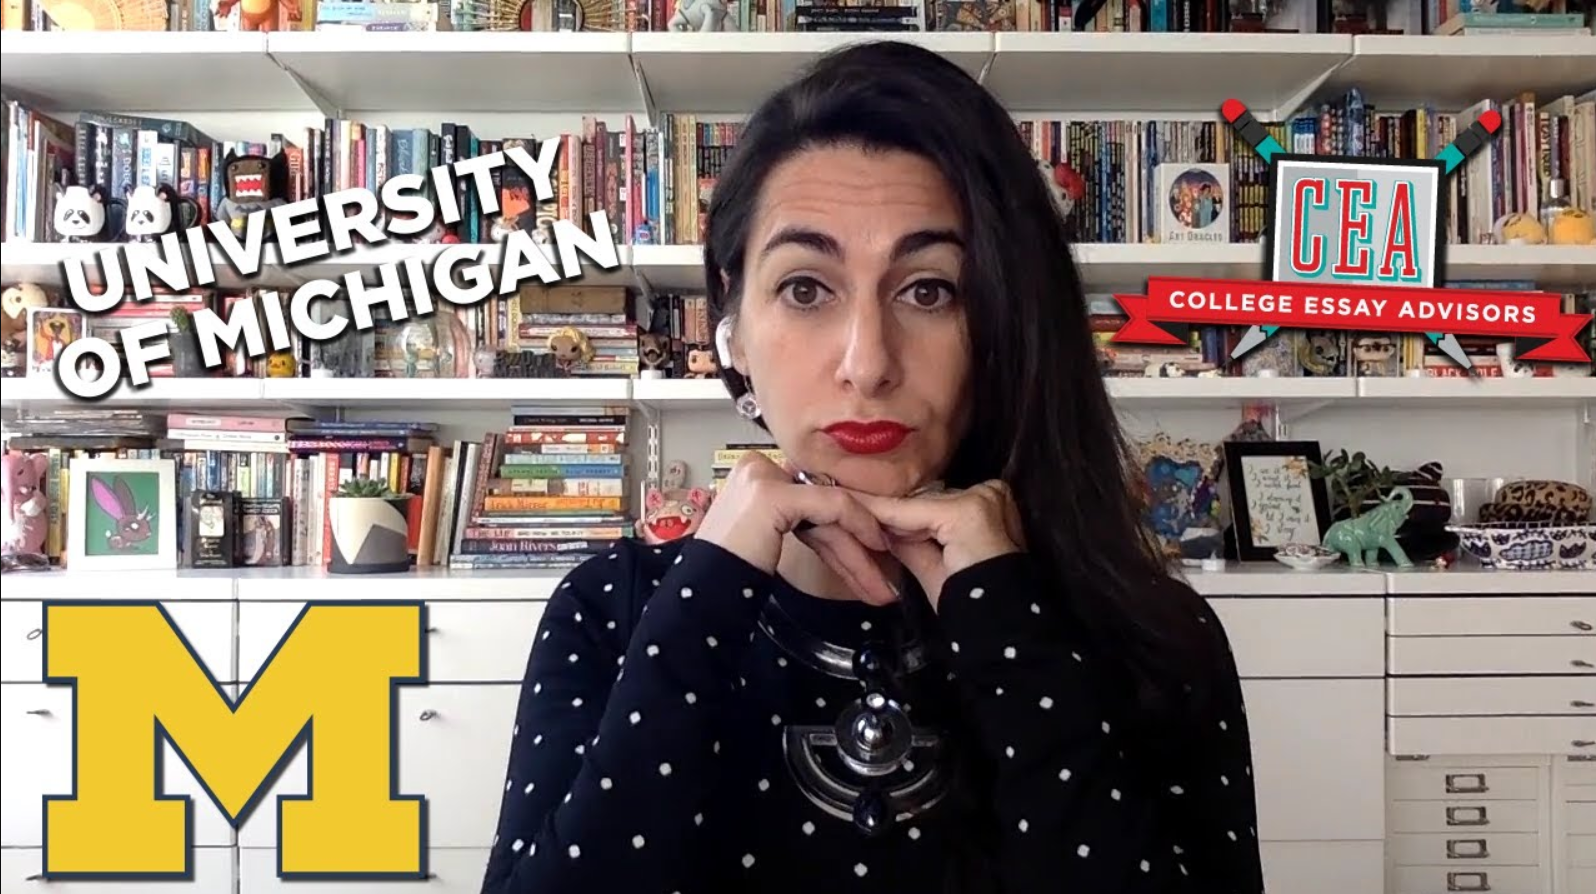 Guide to the 2020-21 University of Michigan Essays | CEA